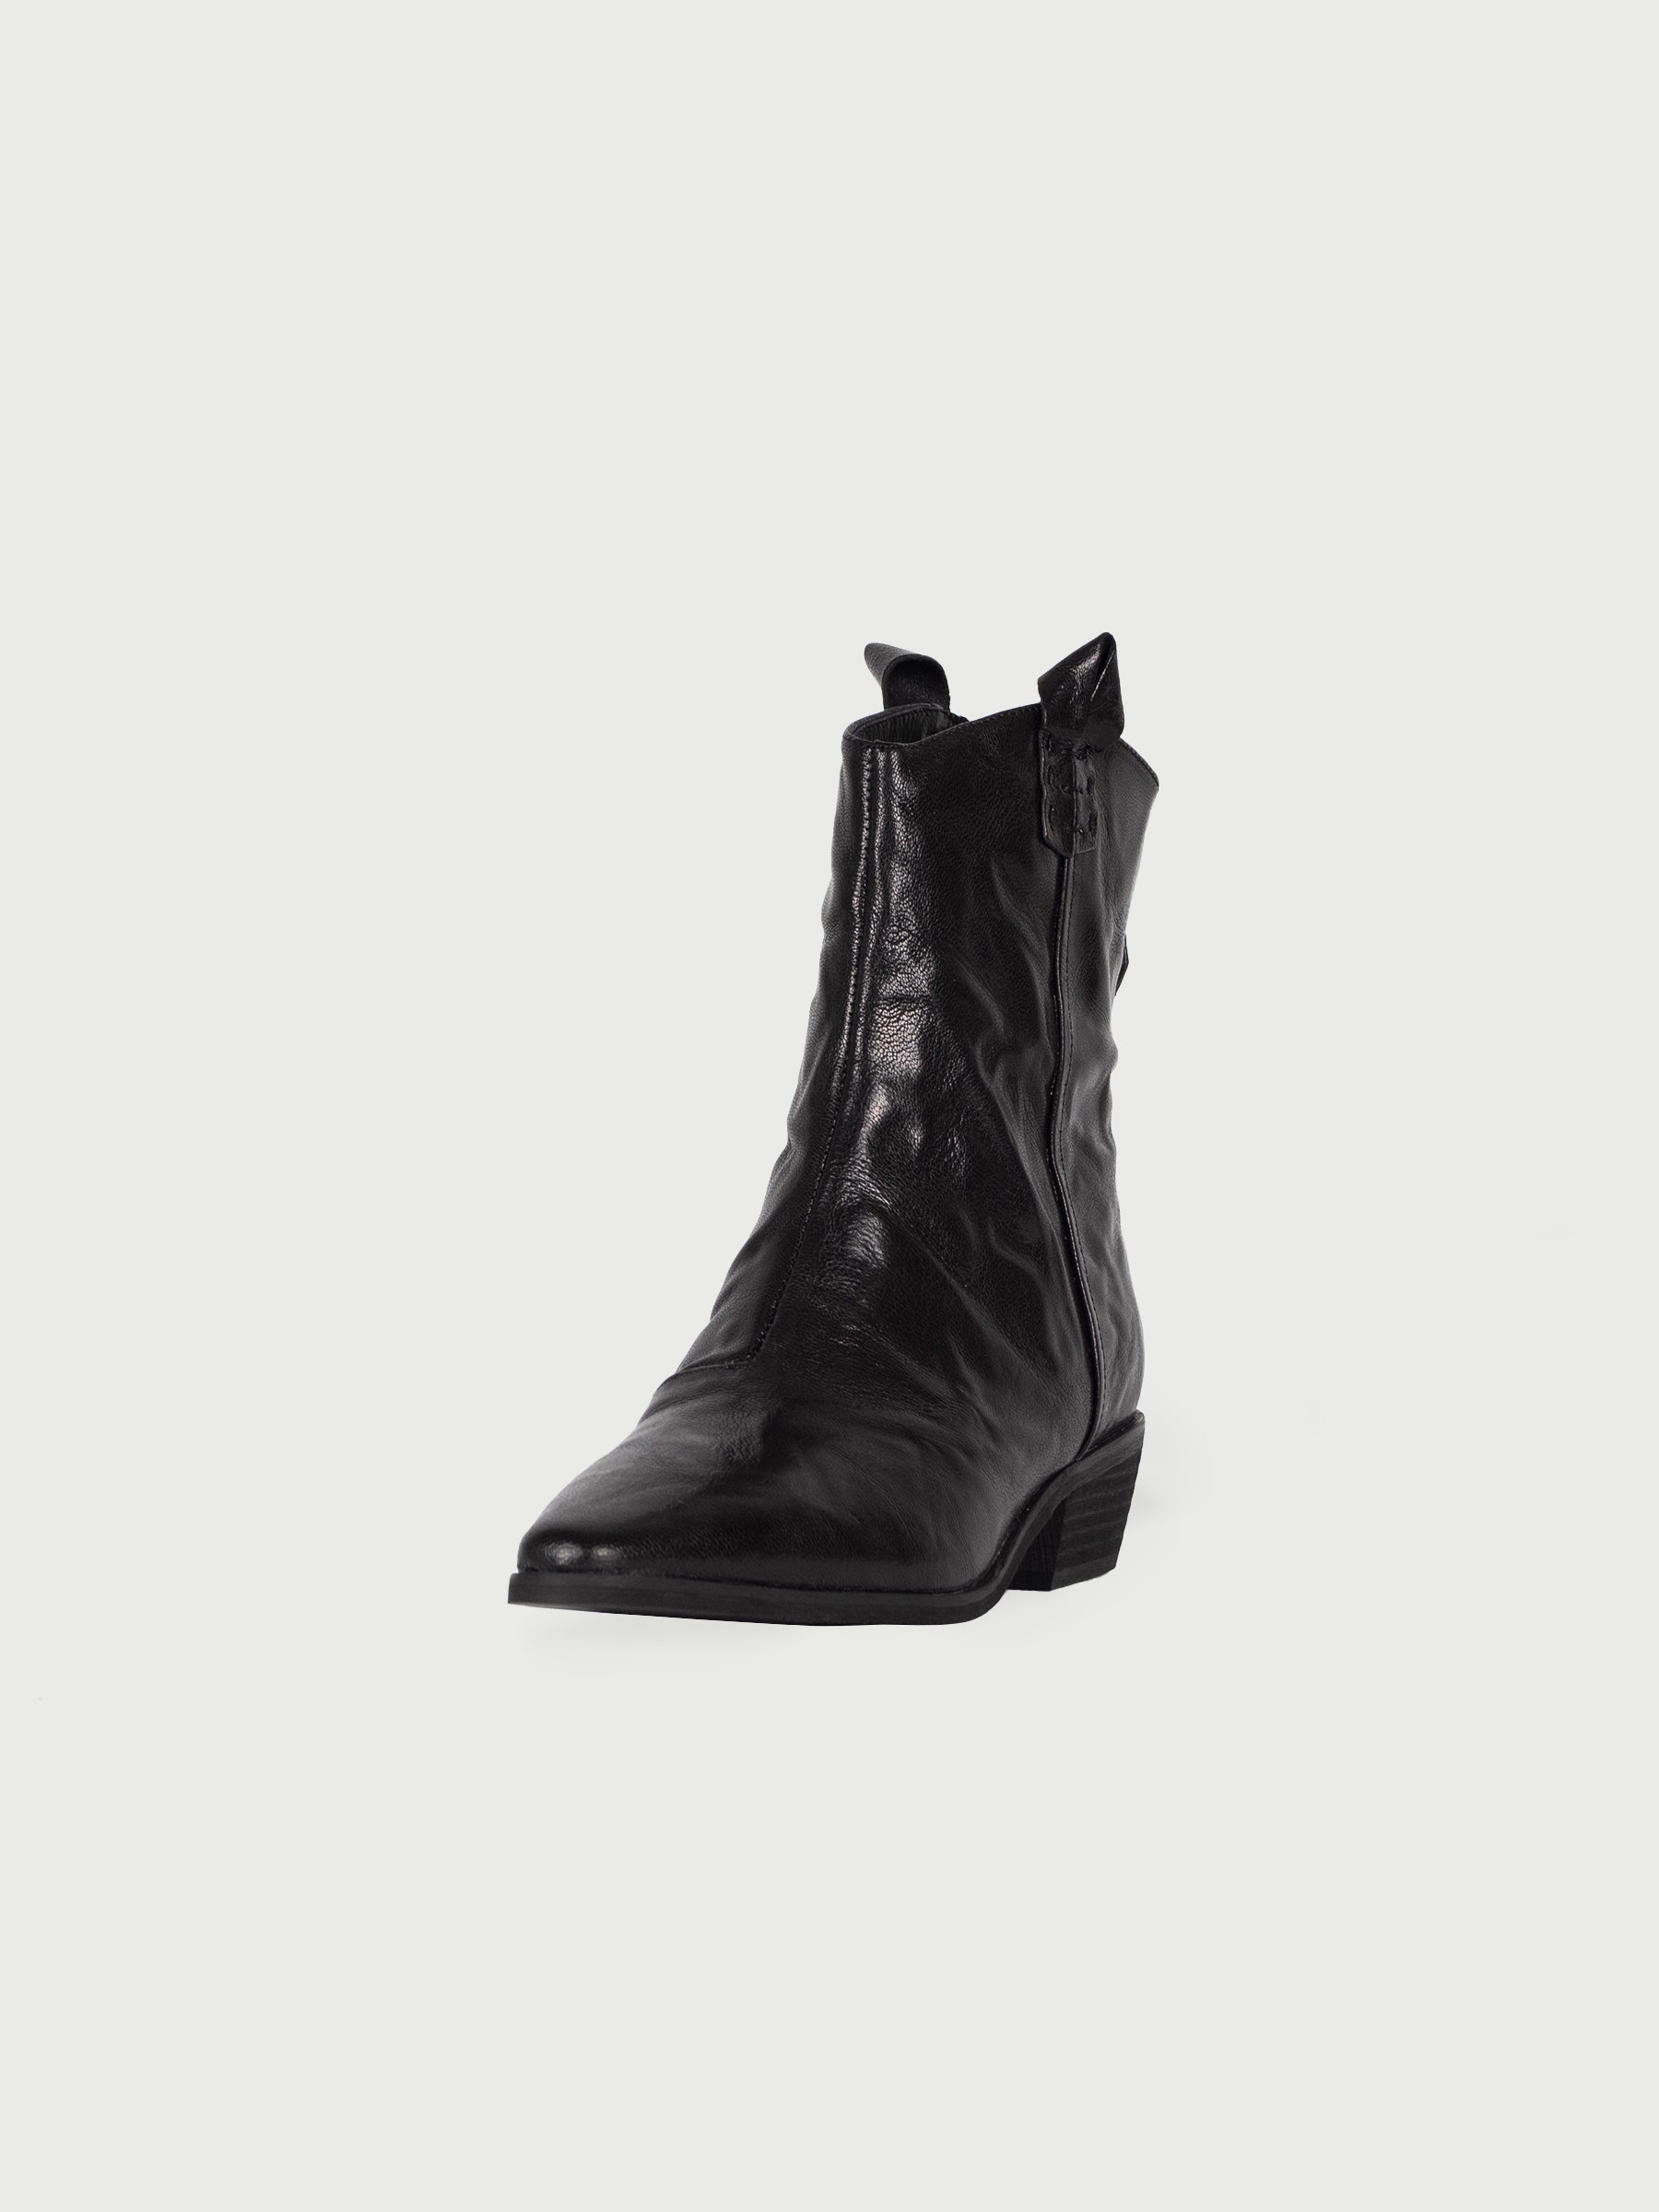 Wrinkled Patent Leather Boots